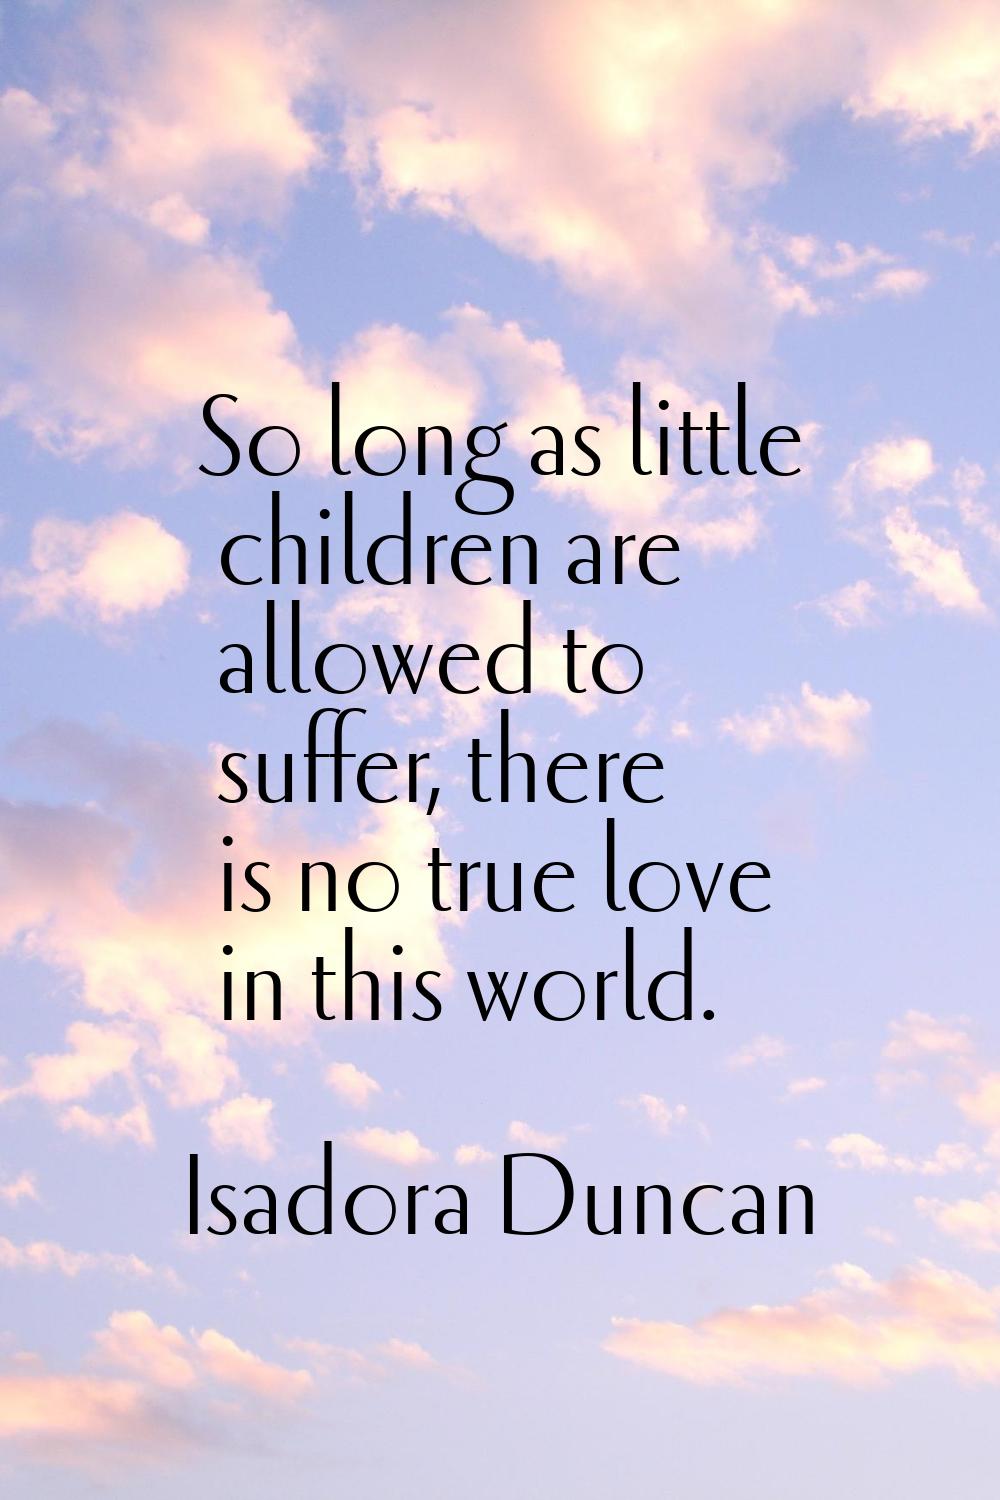 So long as little children are allowed to suffer, there is no true love in this world.